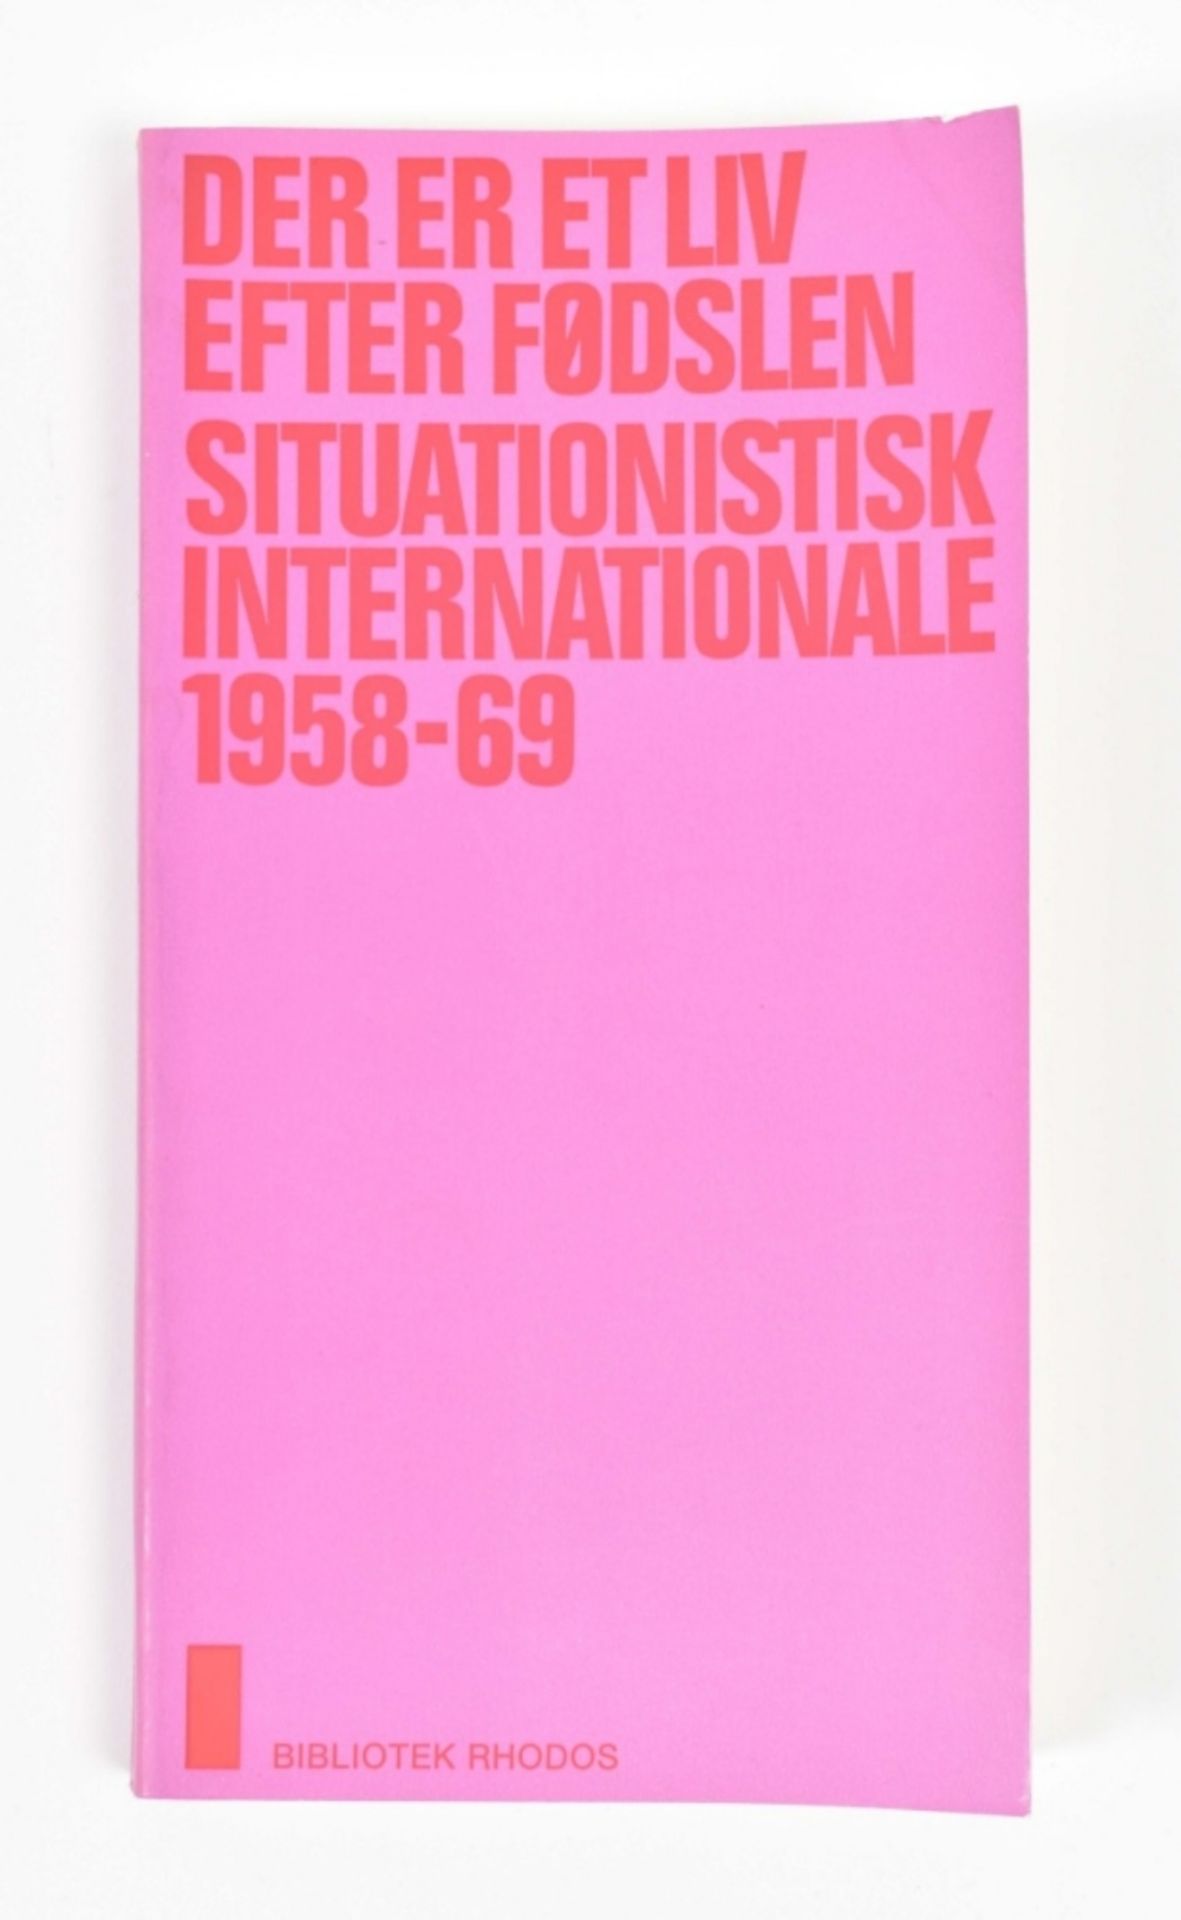 [Situationists] Scandinavian Situationist reference works - Image 2 of 7